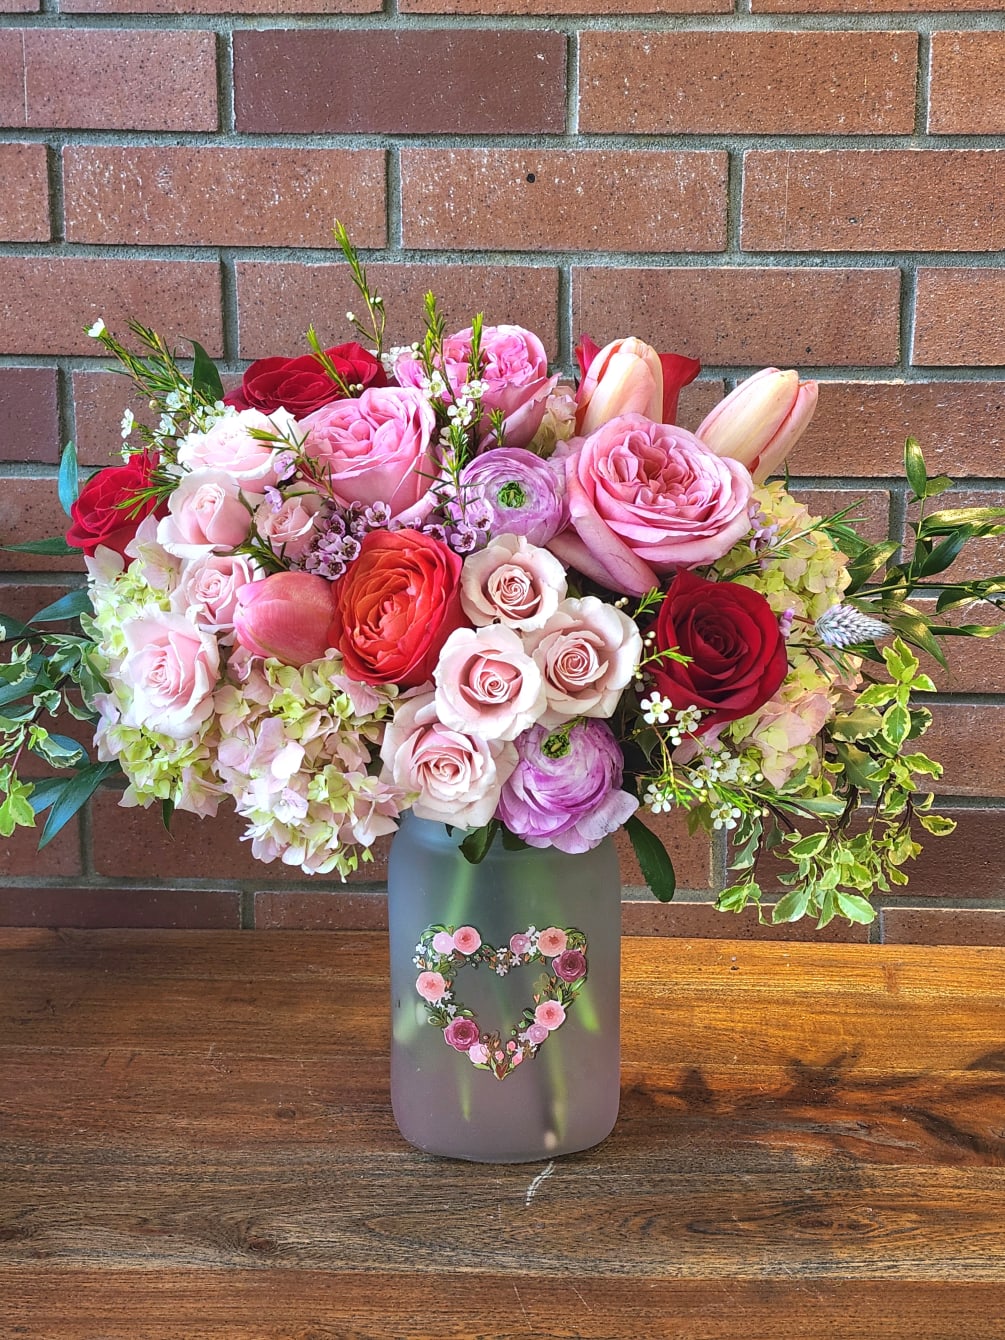 Large vase with a Heart of flowers filled with pink hydrangeas, roses